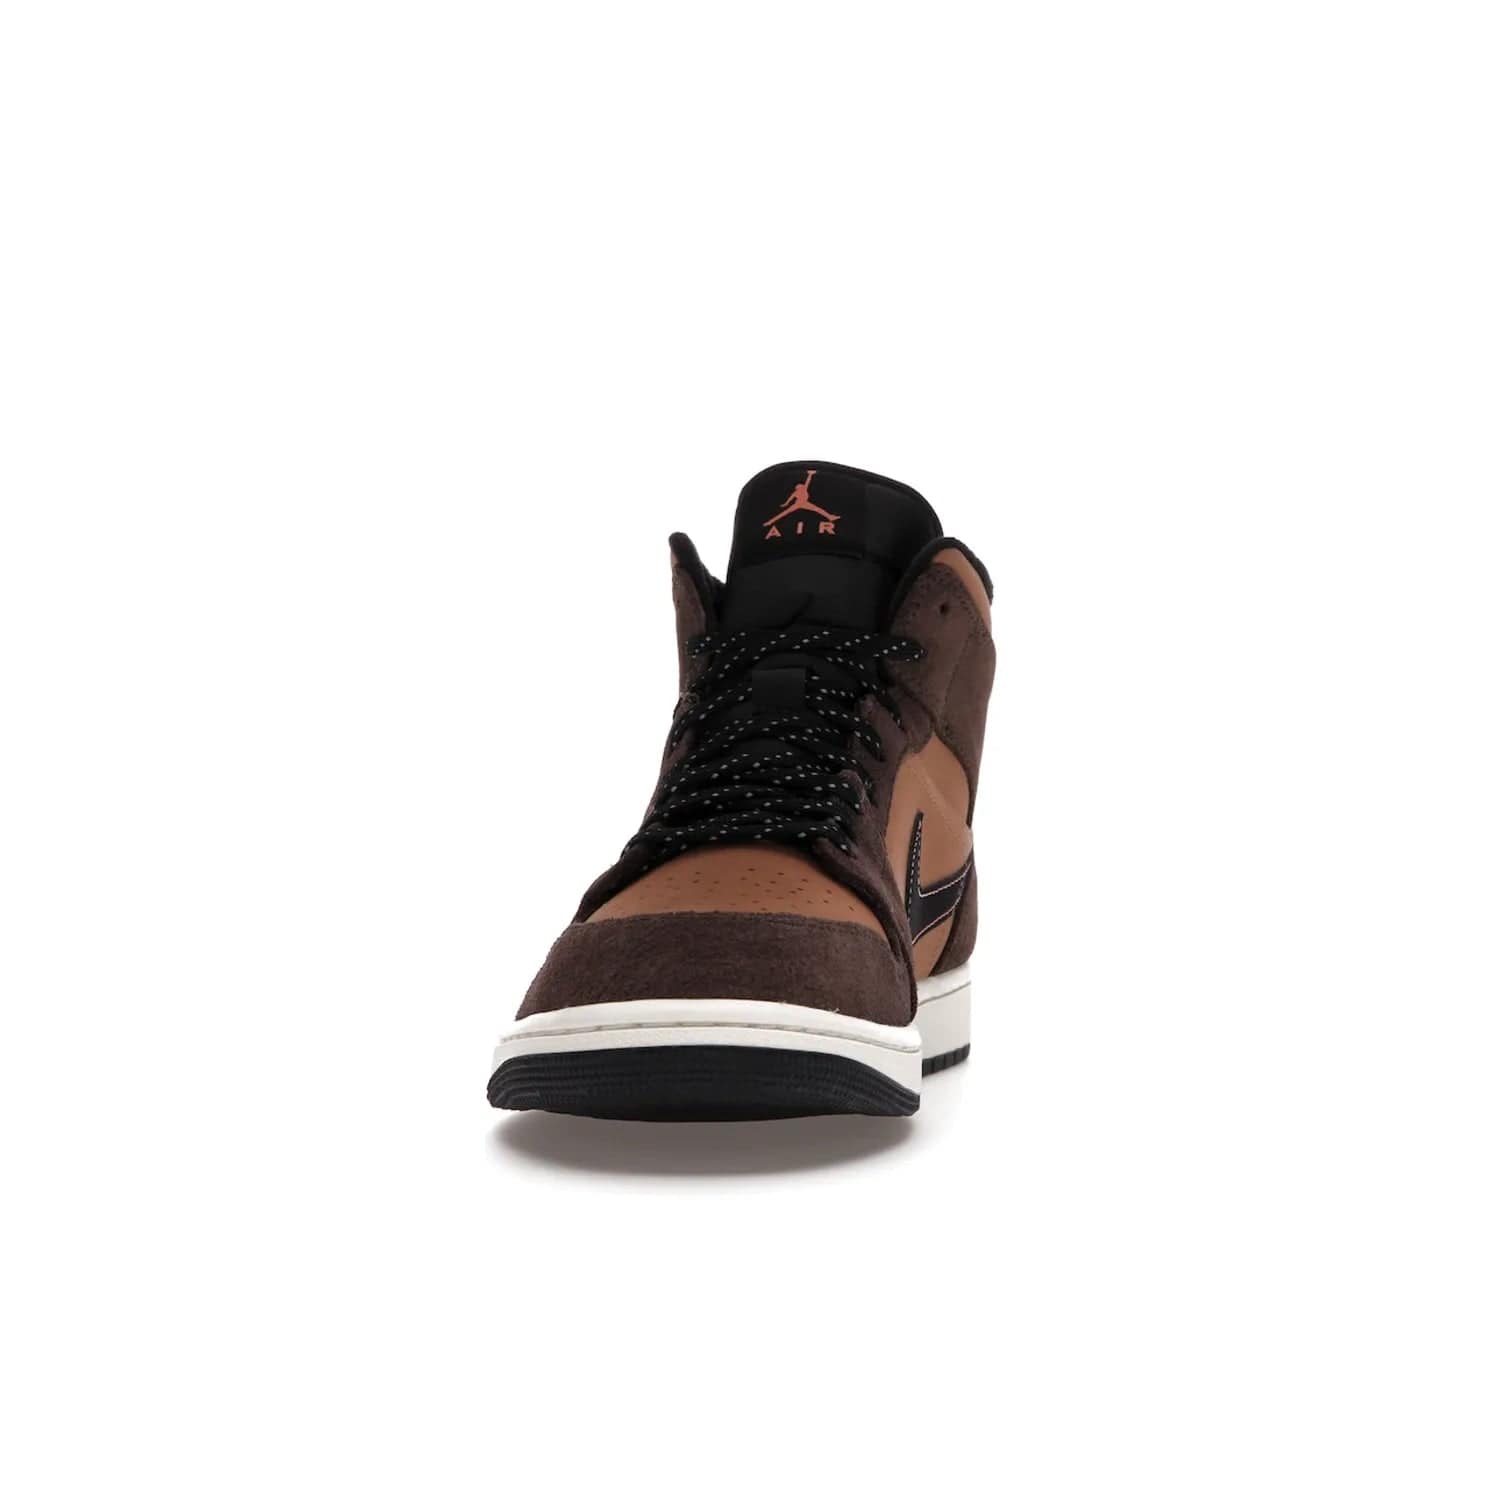 Jordan 1 Mid SE Dark Chocolate - Image 11 - Only at www.BallersClubKickz.com - This fashionable and functional Jordan 1 Mid SE Dark Chocolate features a light brown Durabuck upper, dark brown suede overlays, black Swoosh logos and reflective patch at heel. A must-have for any sneakerhead!